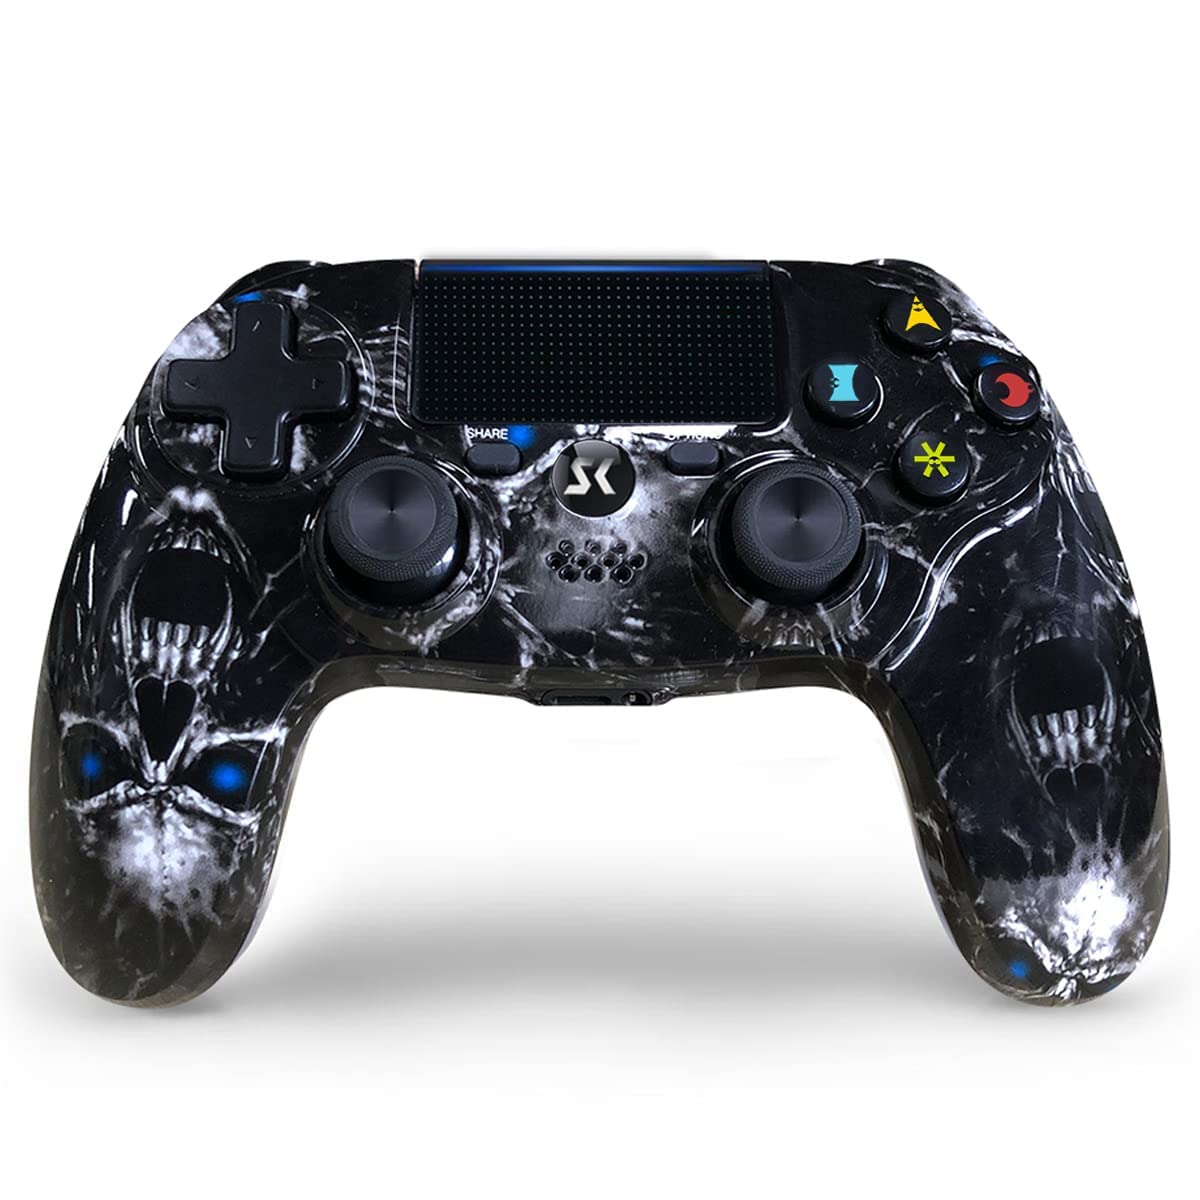 Kujian Wireless Controller for PS4, Black Skull Style Double Shock High Performance Controller Compatible with Playstation 4/Pro/Slim/PC with Headset Jack, Touch Pad, Motion Control, Audio Function